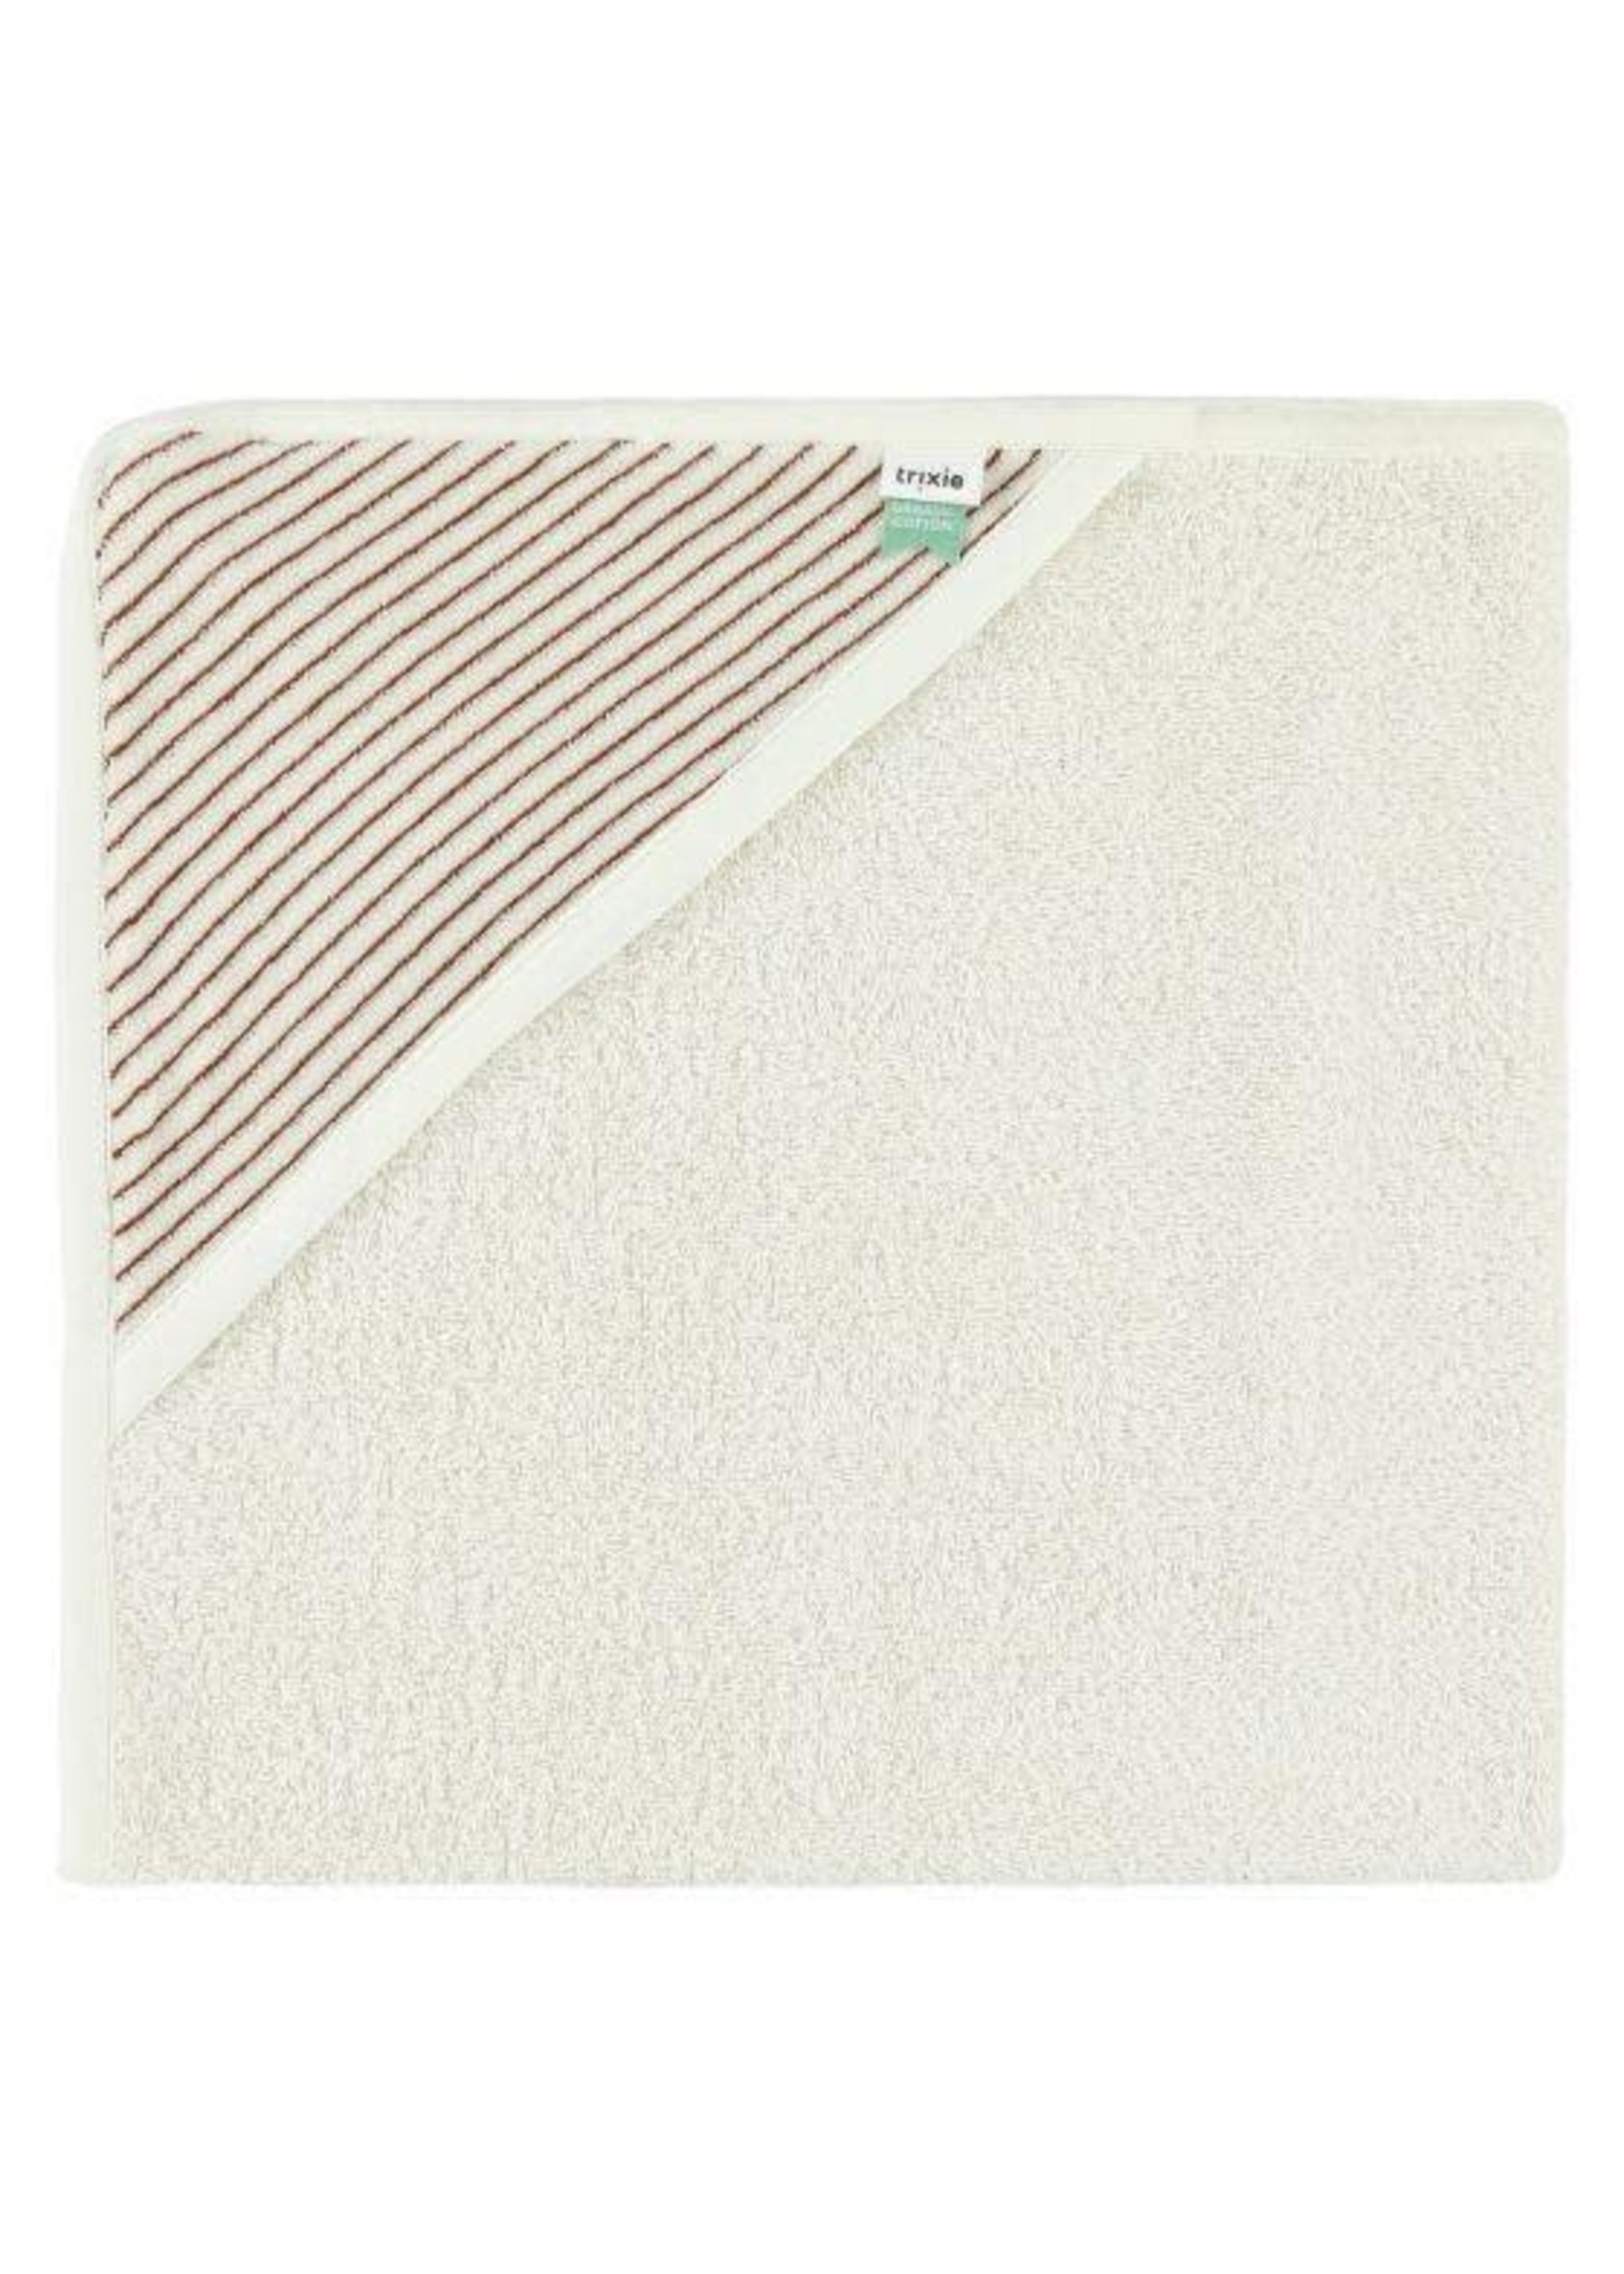 Trixie Baby Trixie Stripes Rust Hooded Towel